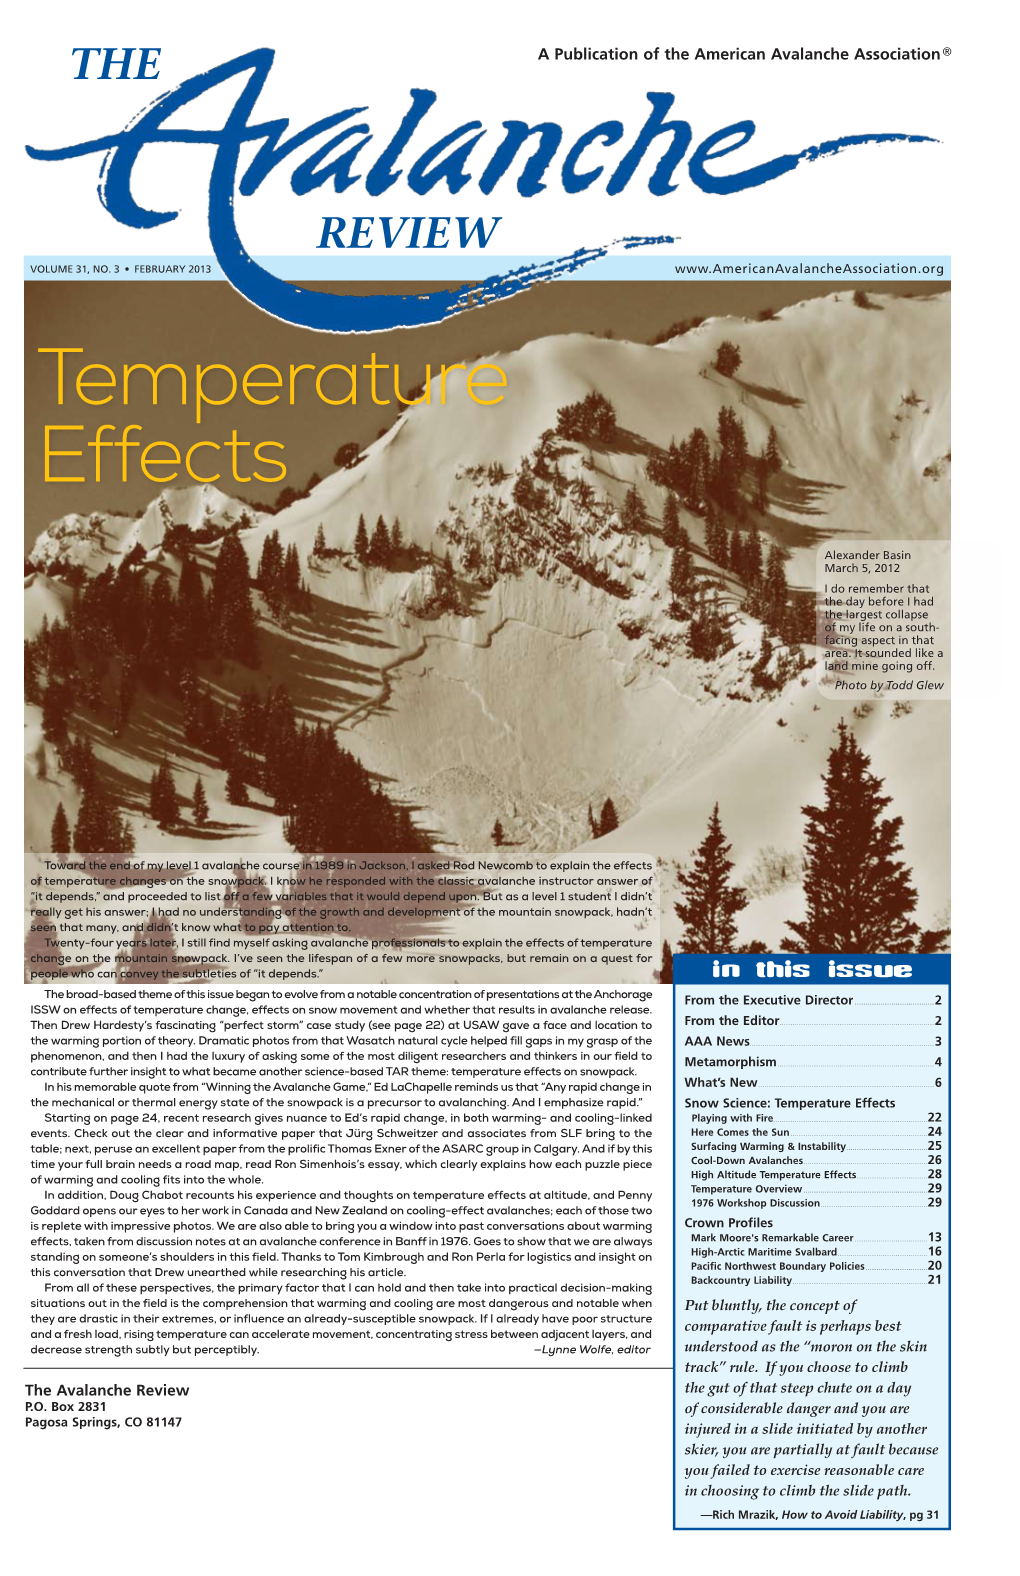 Temperature Effects